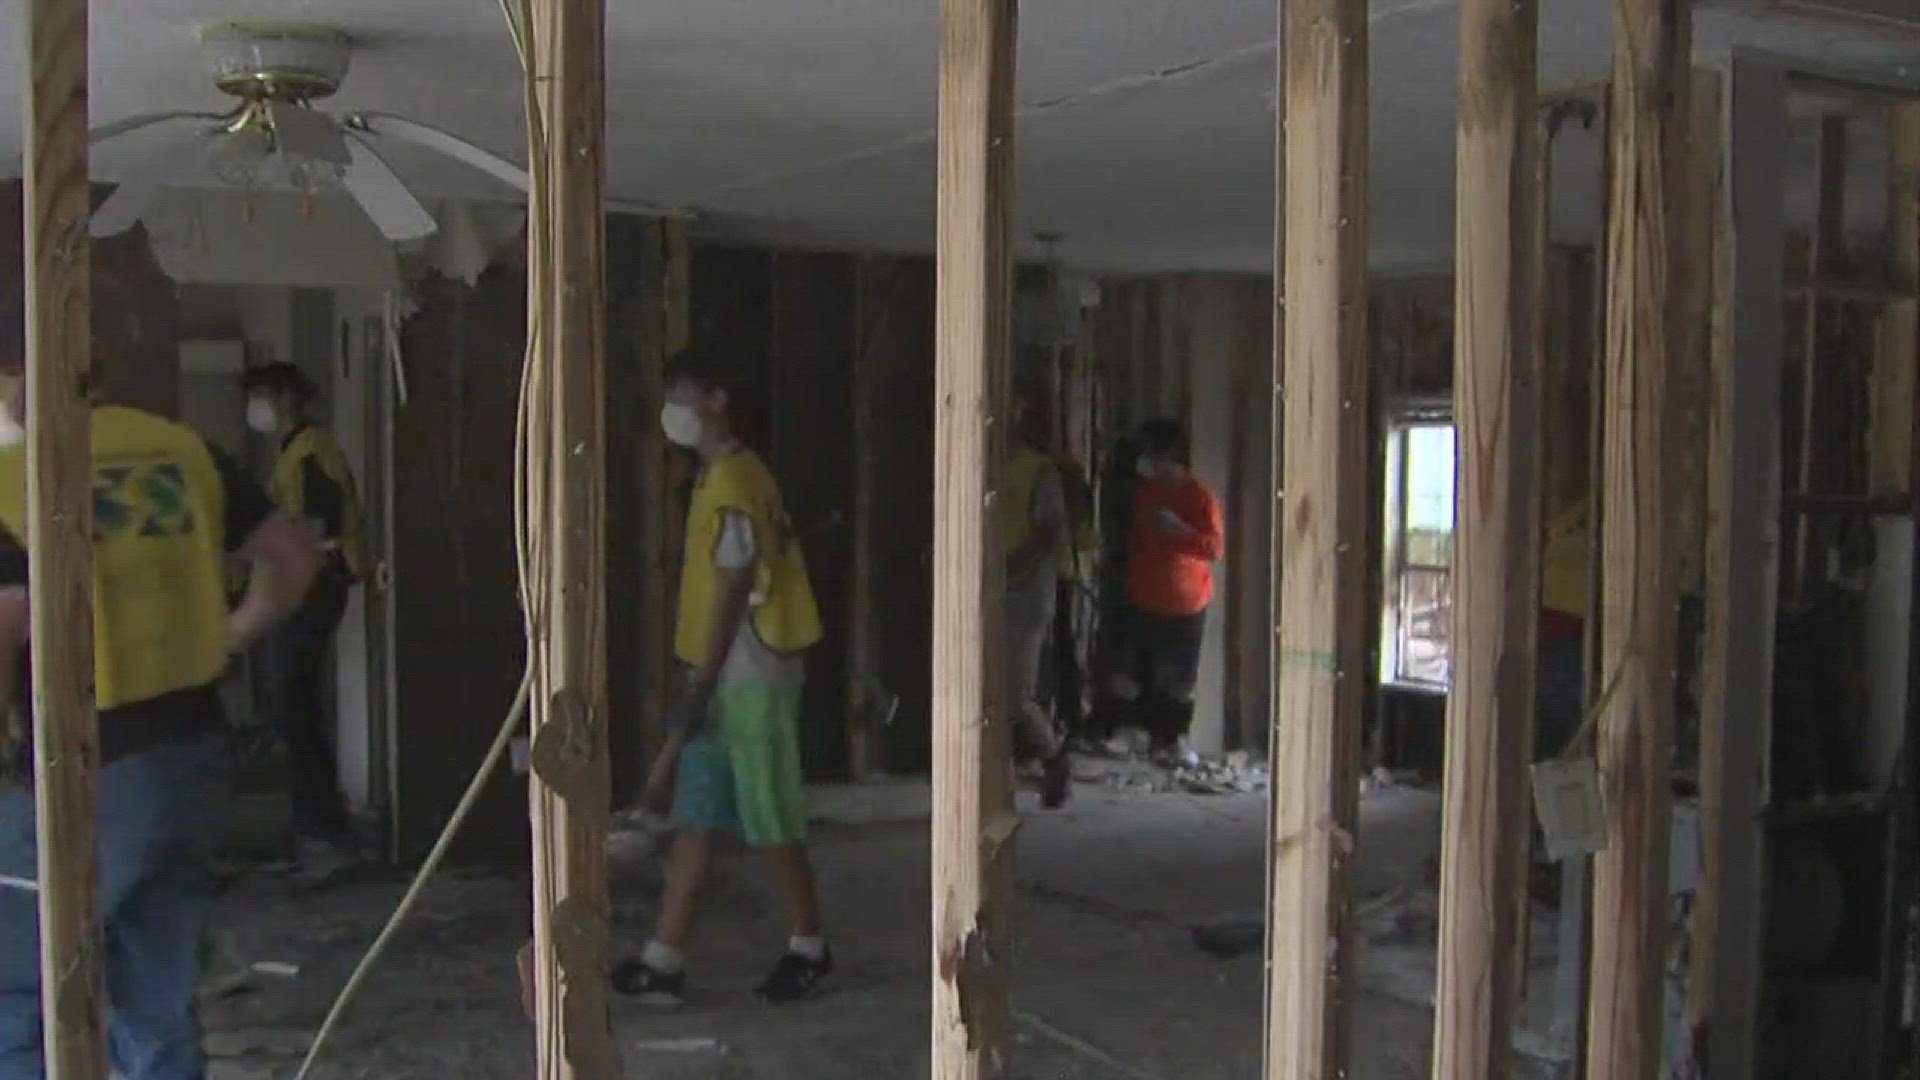 Over 3,000 volunteers from the Dallas-Fort Worth area came to help clean up houses in Southeast Texas